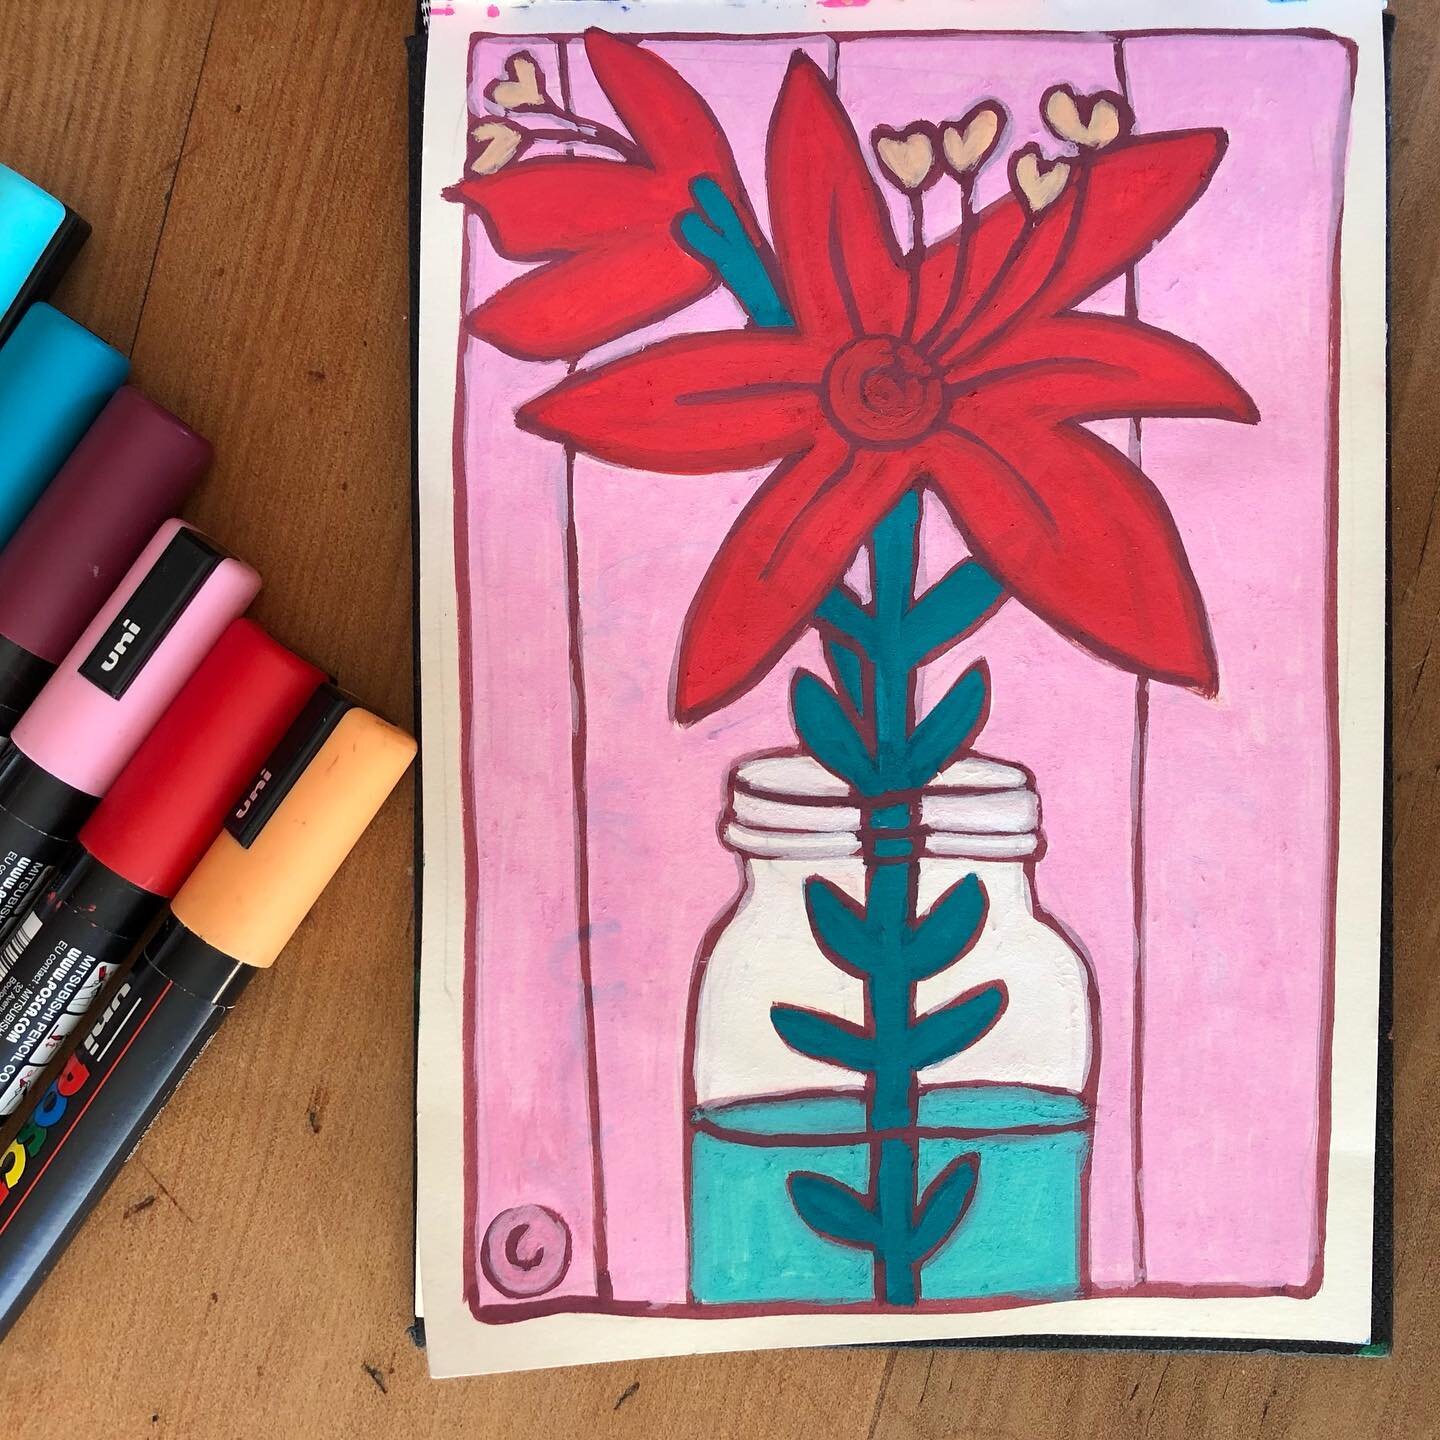 Lovely Lillies

#posca #poscapen #dailyart #the100dayproject #illustrationoftheday